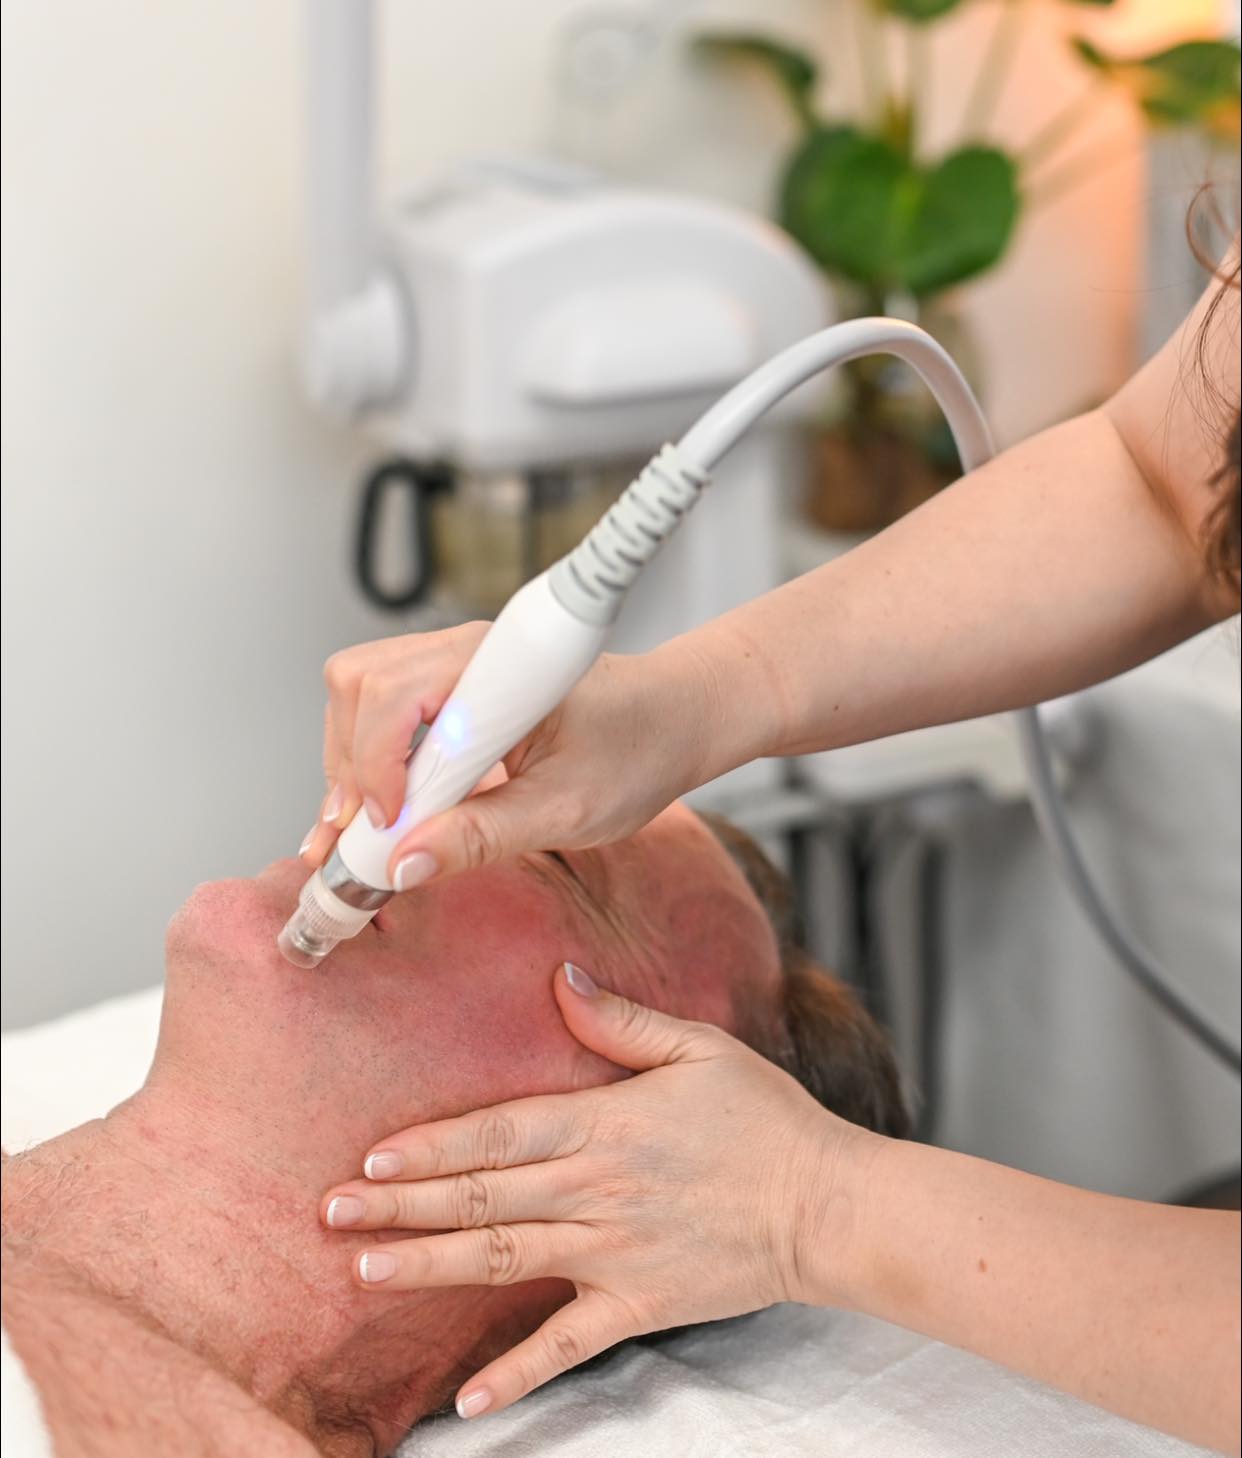 HYDRA FACIAL 6-in-1 THERAPY COURSE